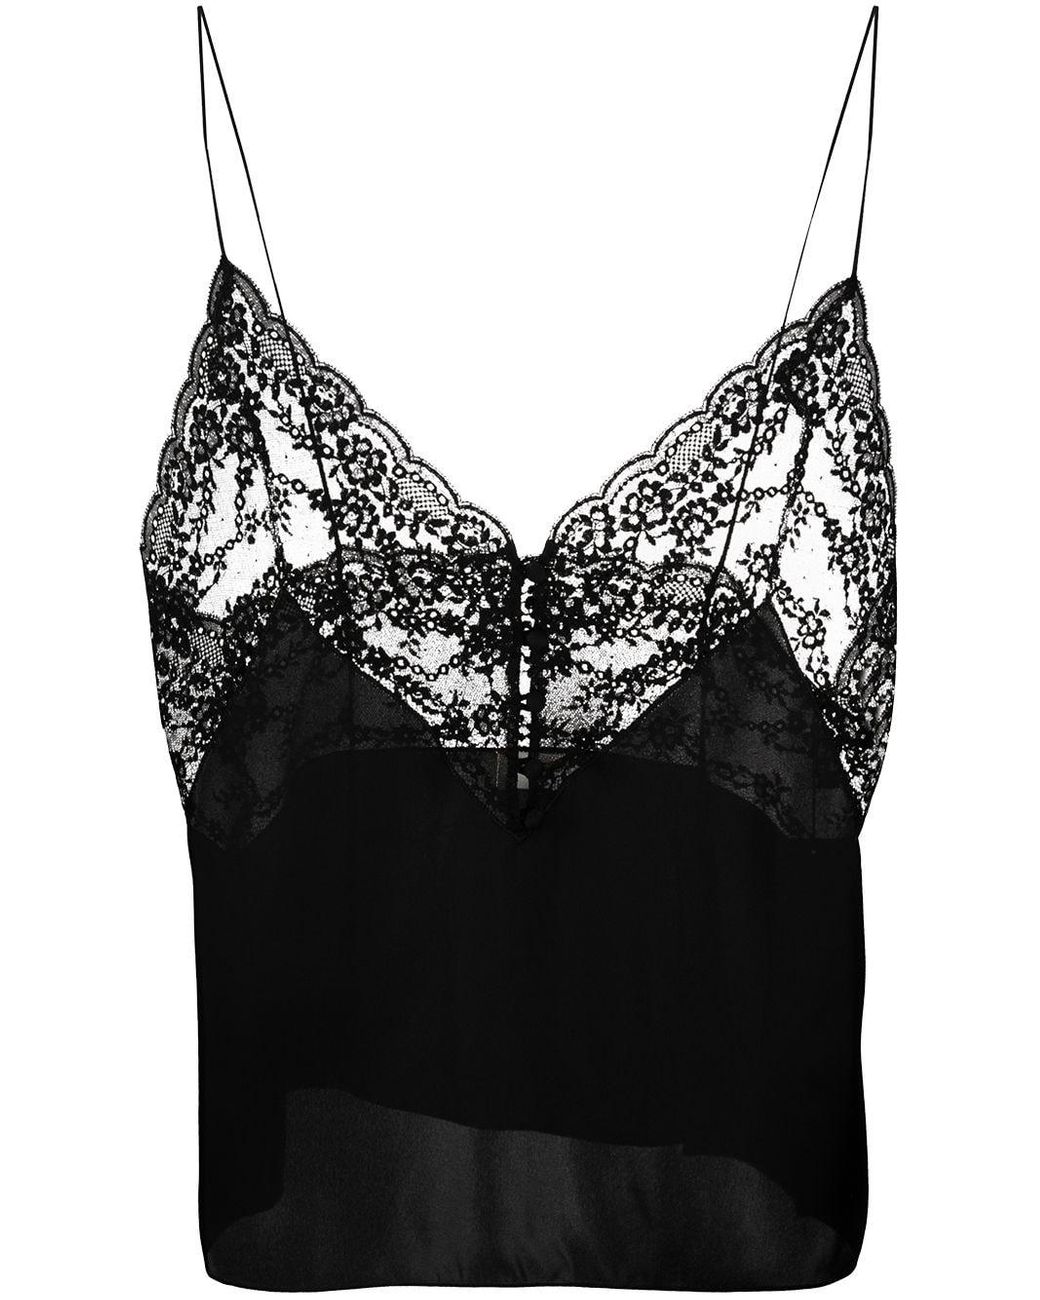 Saint Laurent Floral Lace Cropped Camisole Top in Black - Lyst